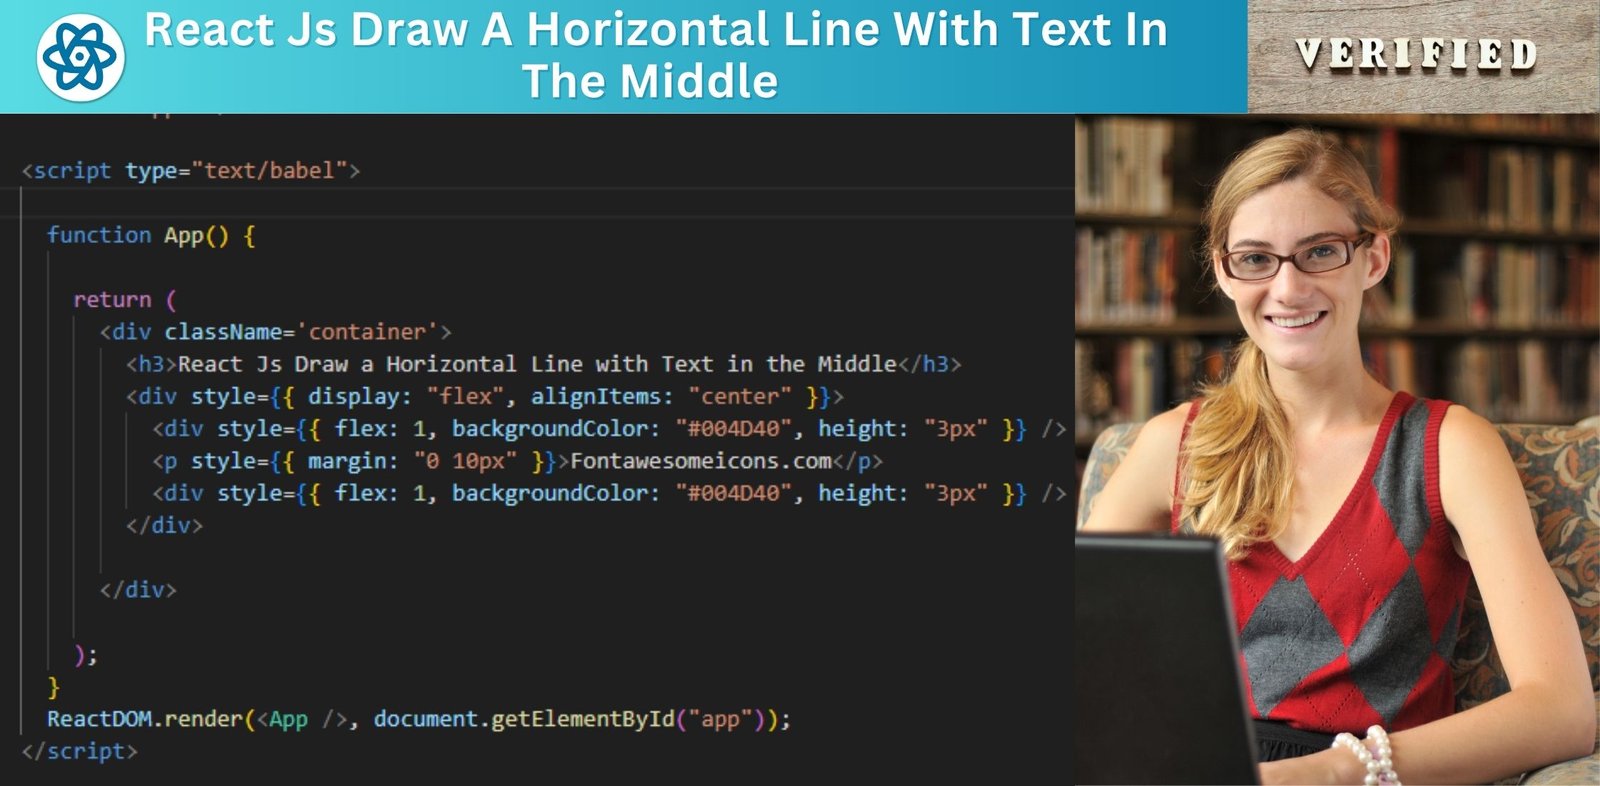 React Js Draw a Horizontal Line with Text in the Middle